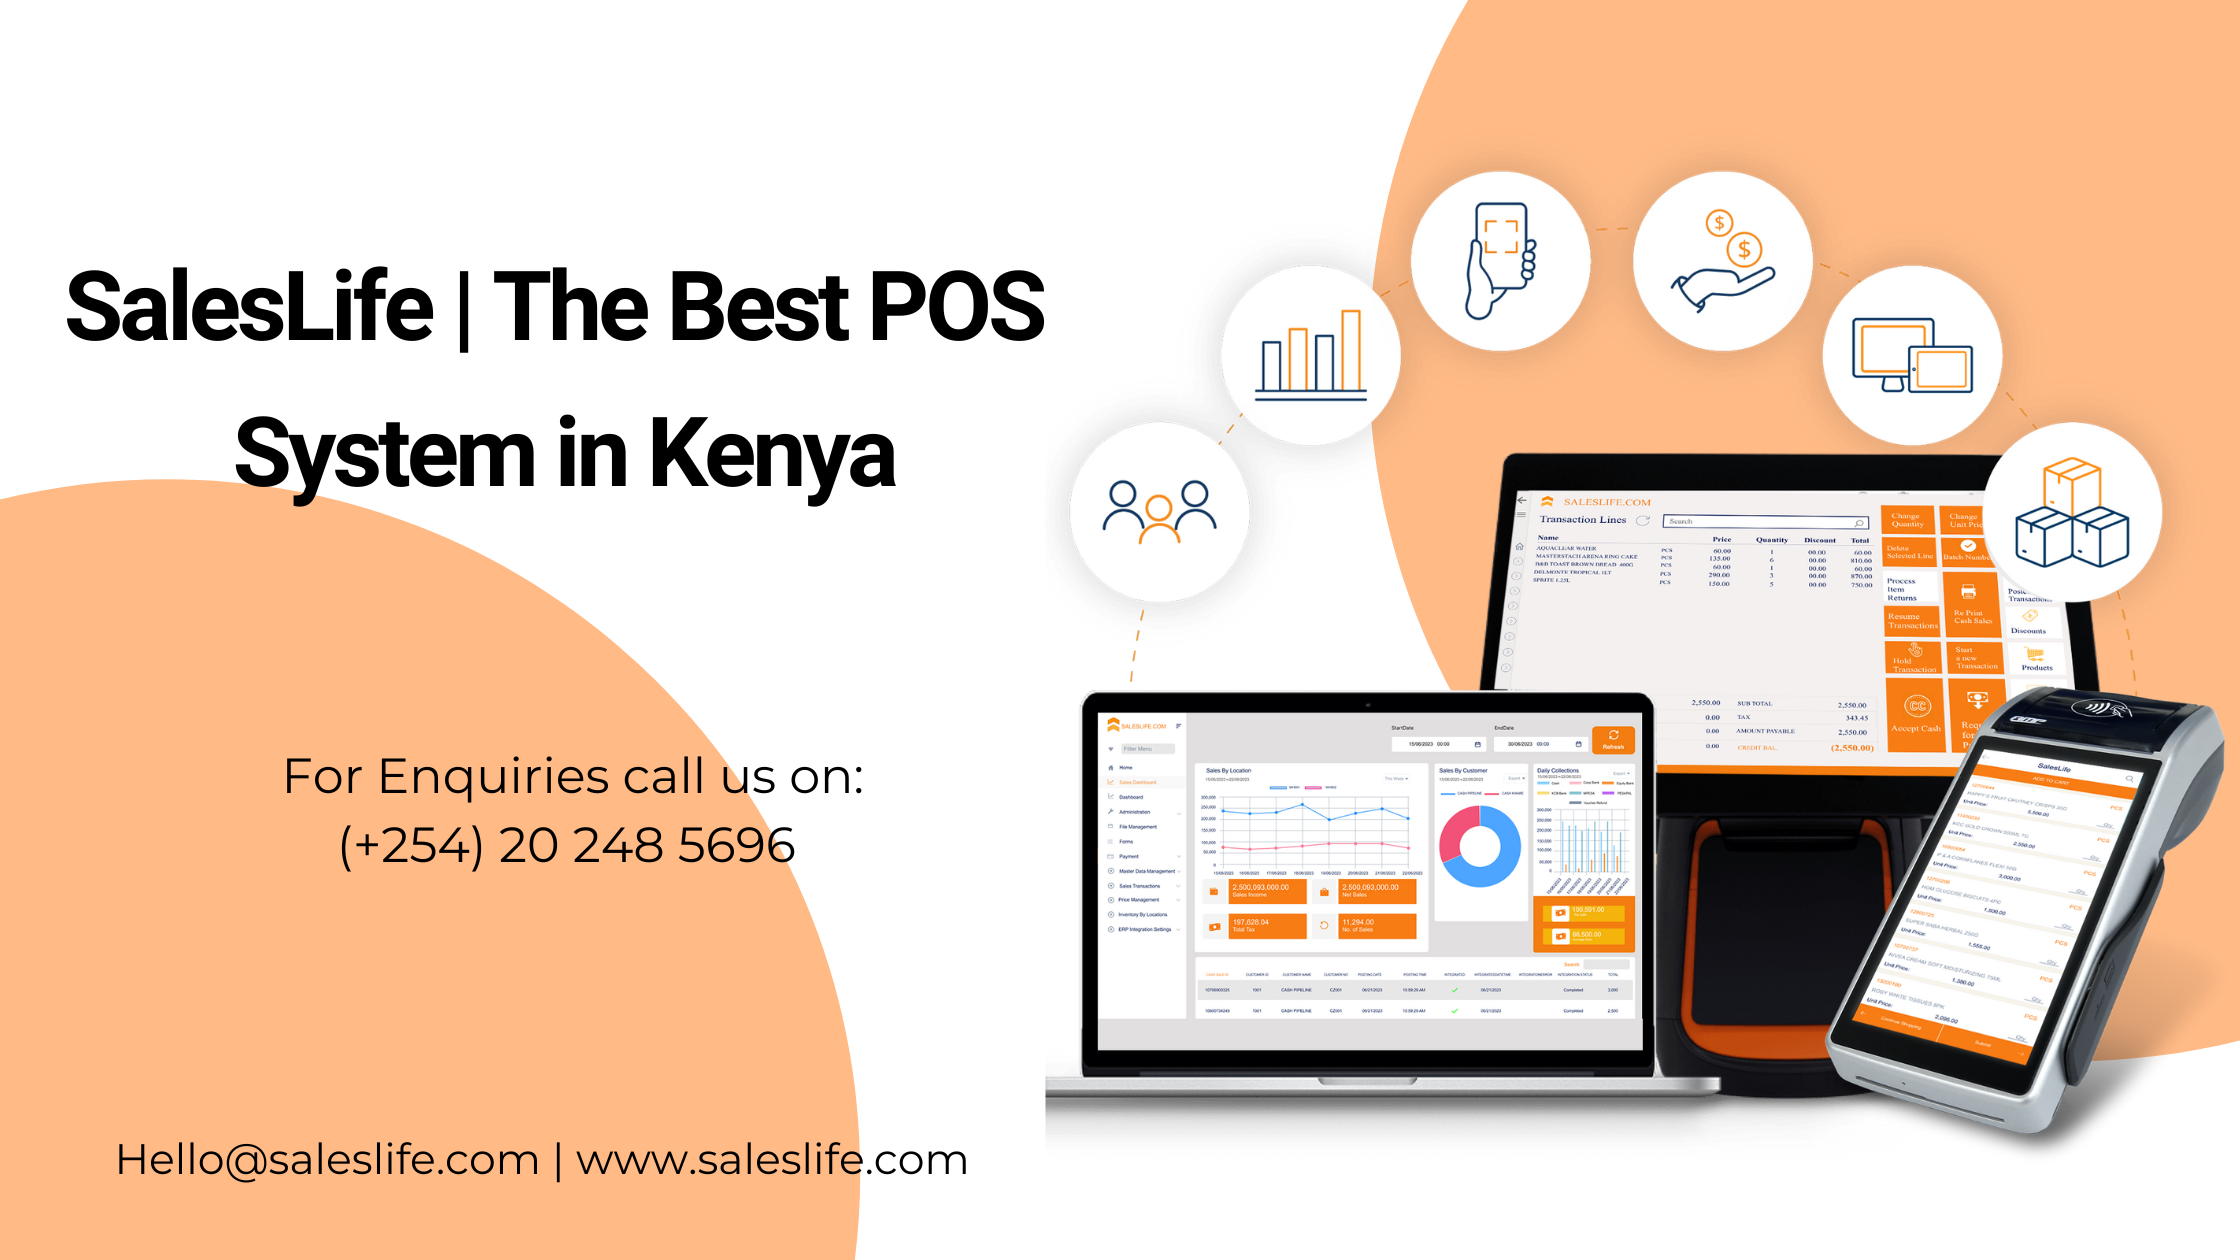 An infographic showing SalesLife POS interface as the best POS system in Kenya.